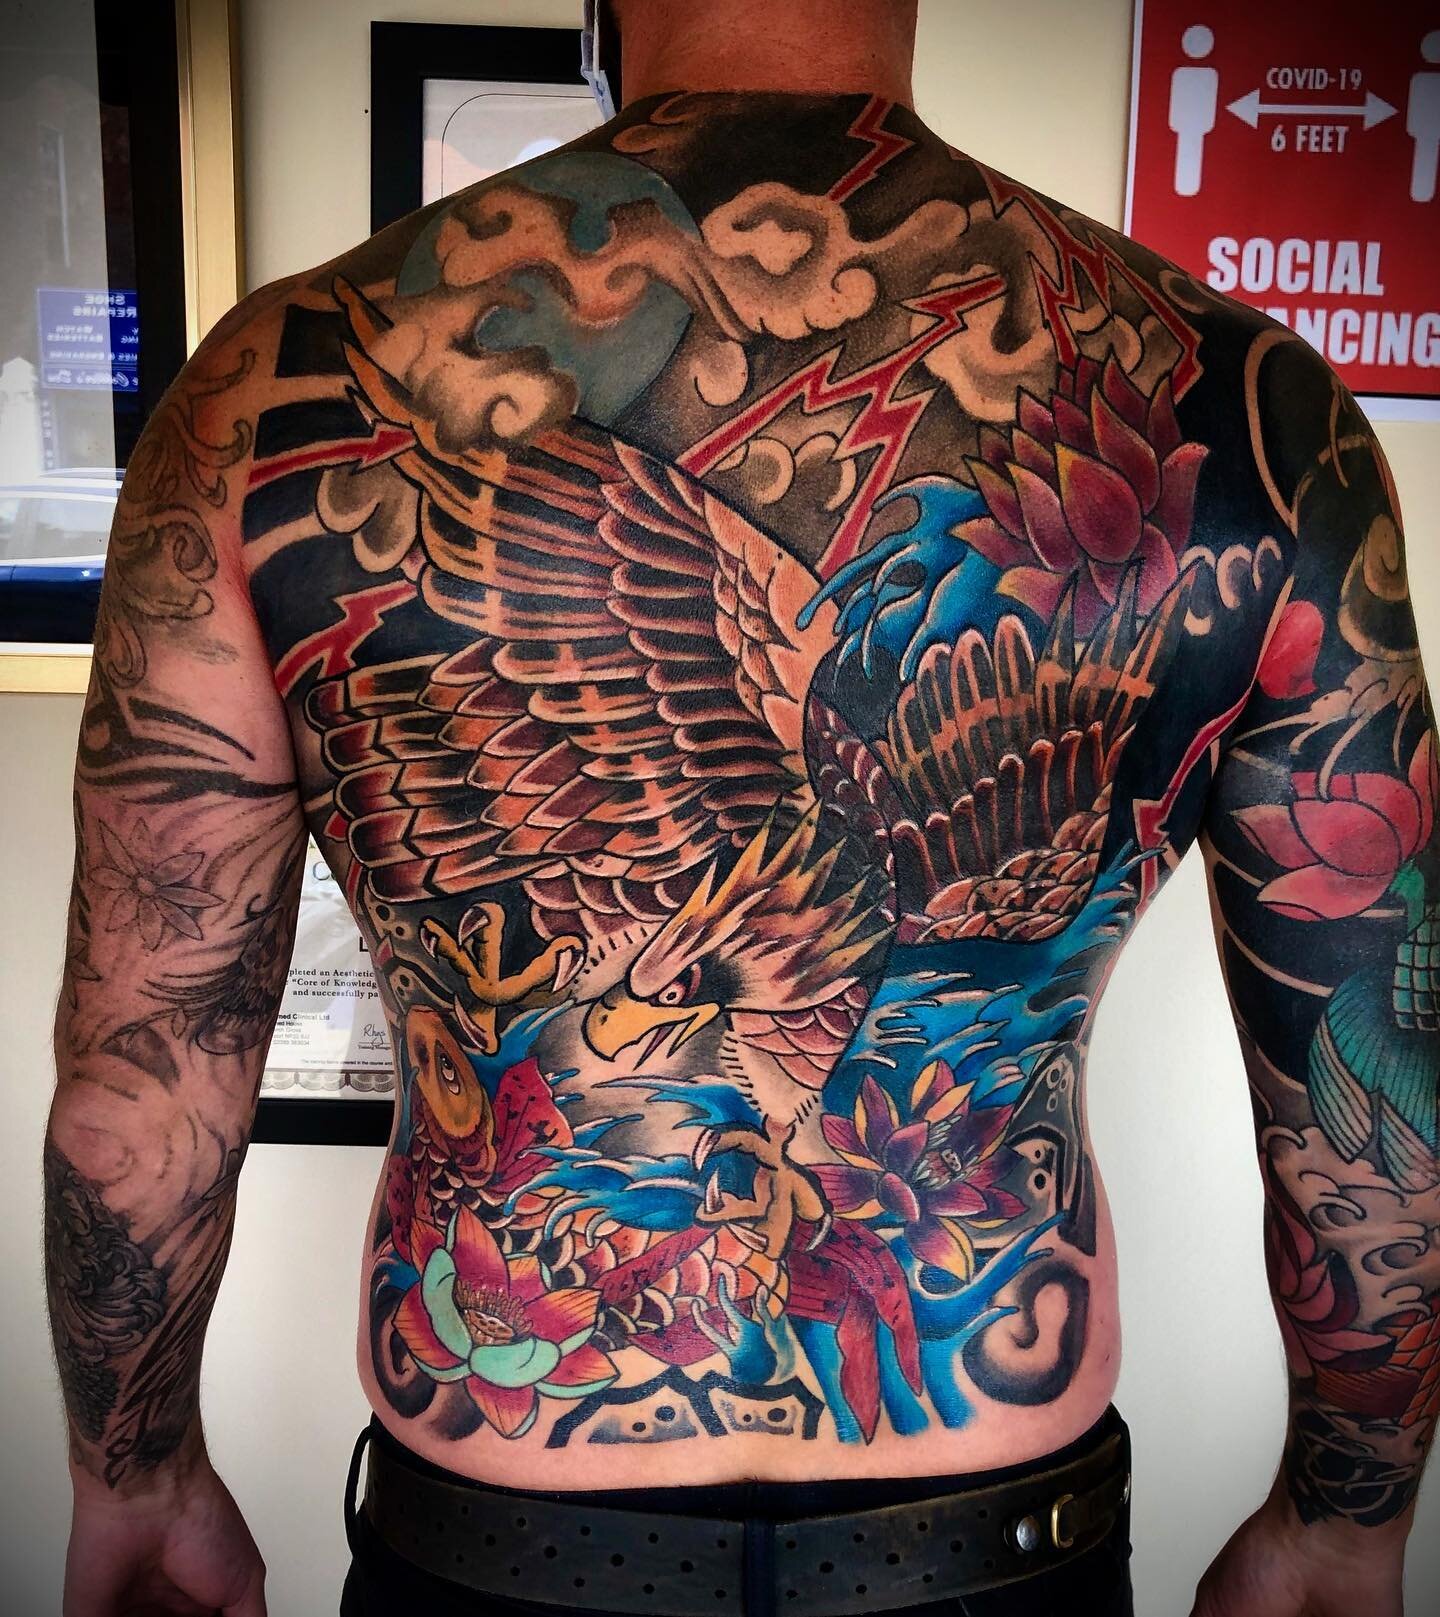 Got to finally finish this epic cover up on Matt&rsquo;s back this week. Please check out his awesome mosaic artwork at @leakymosaics #japanesetattooing #japanesetattooart #tattoocoverups #tattoos #koifishtattoo #eagletattoo #backpiece #japanesetatto